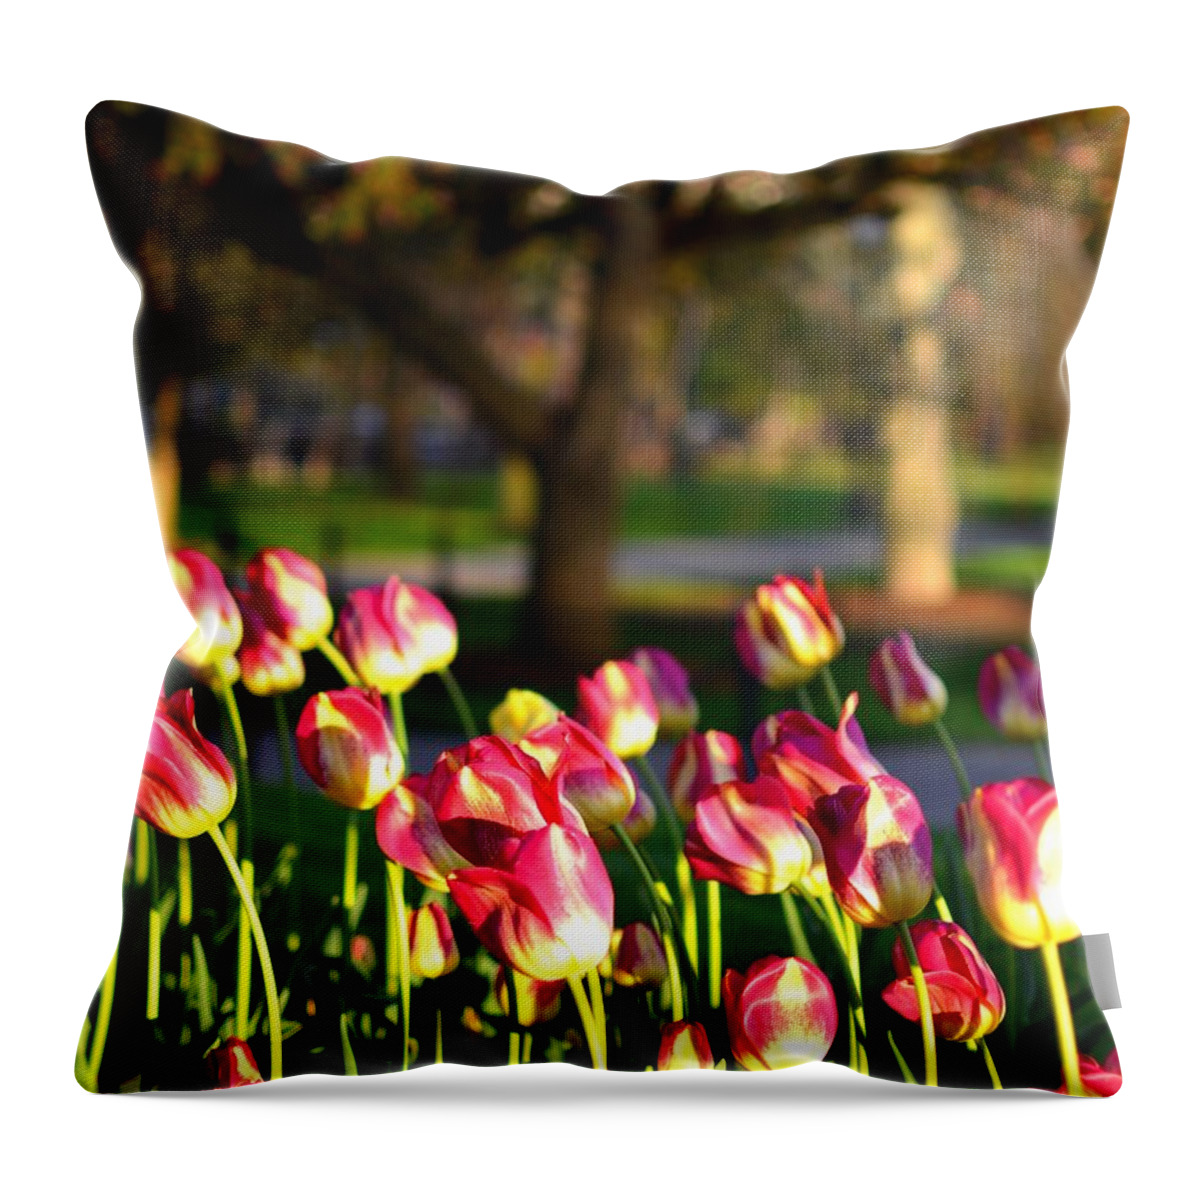 Boston Throw Pillow featuring the photograph Boston Public Garden Tulips by Toby McGuire